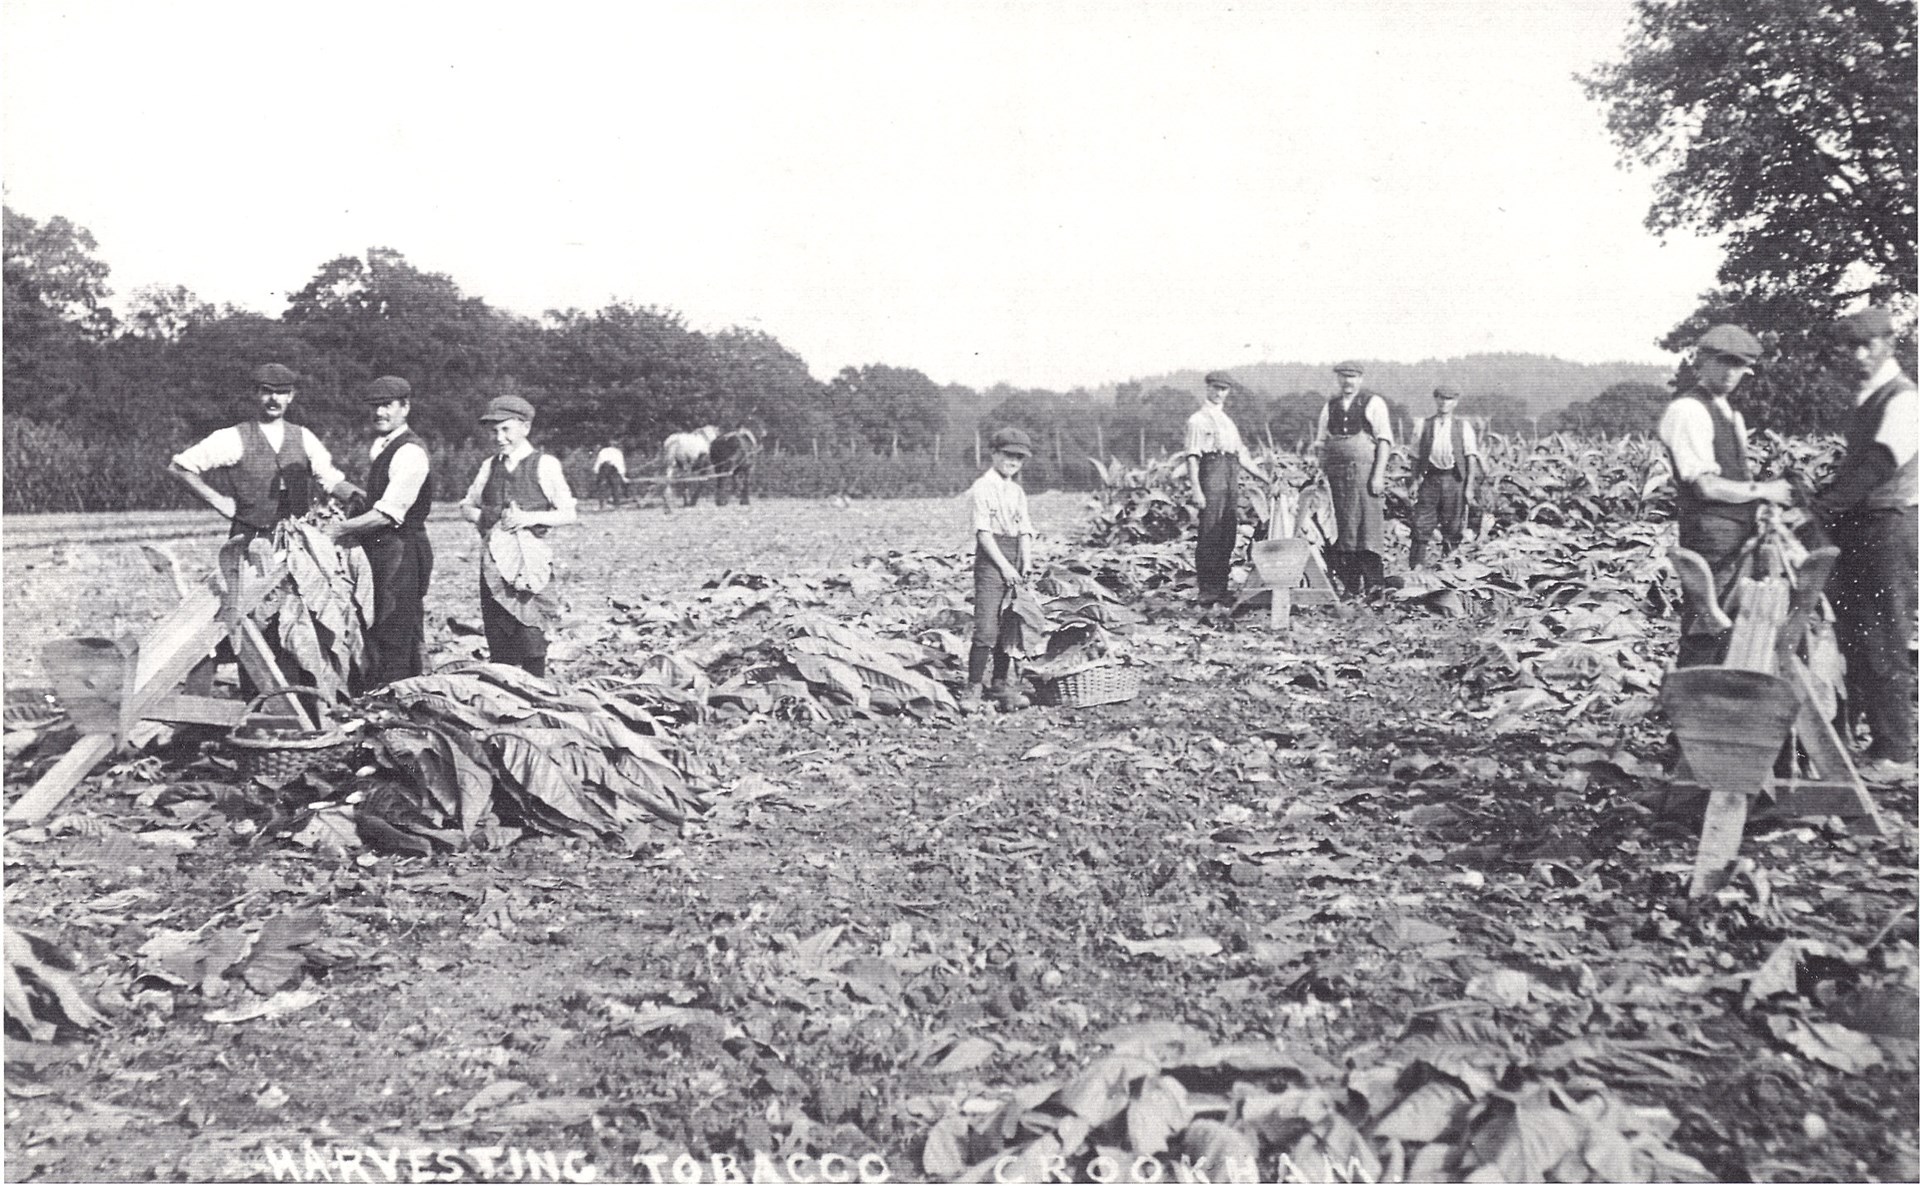 Harvesting tobacco at Redfields